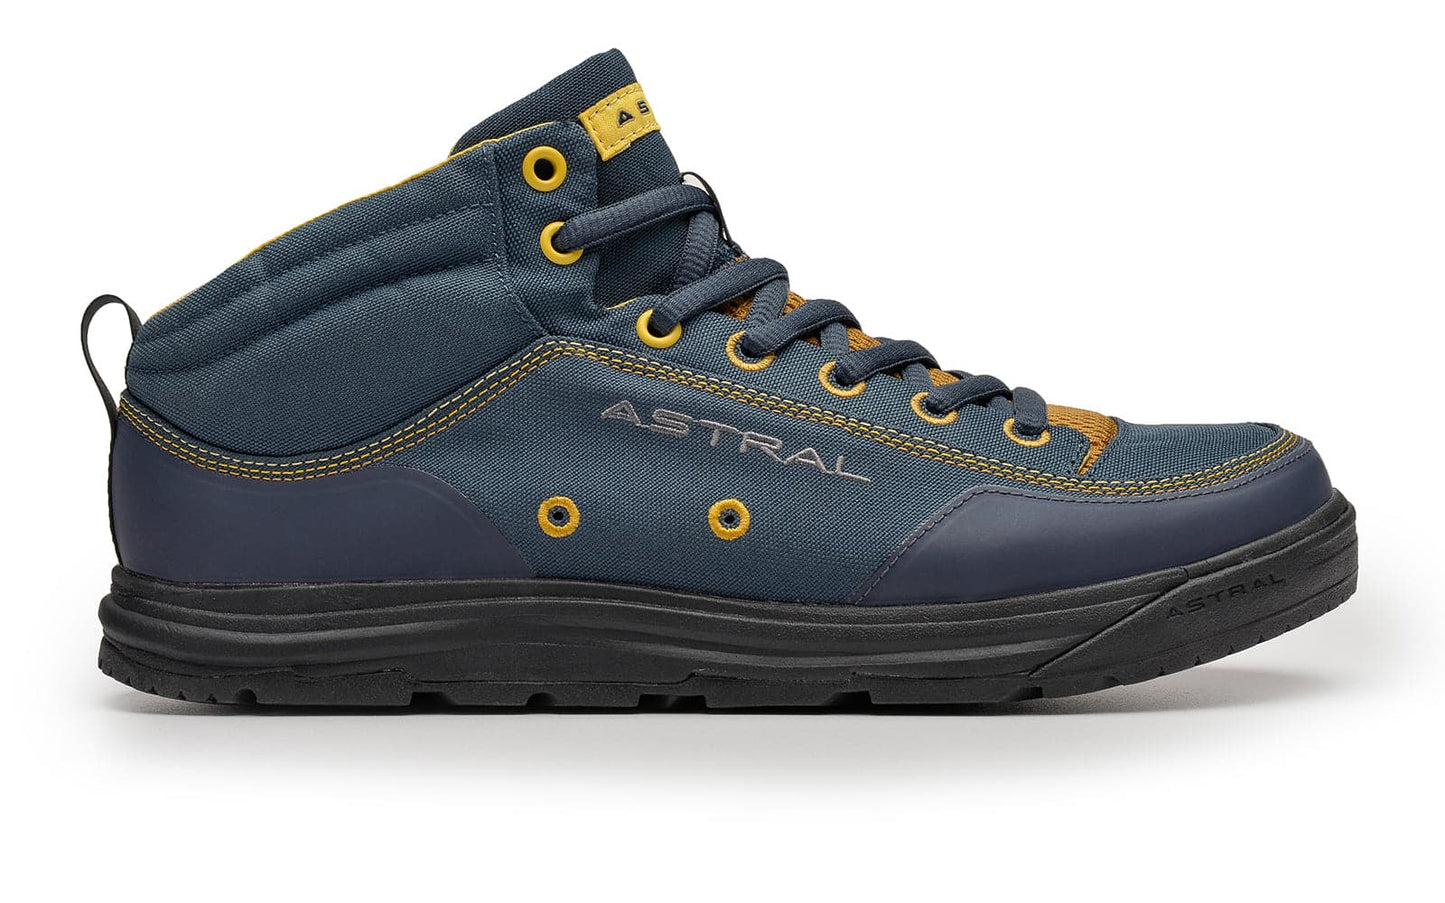 Featuring the Rassler 2.0 men's footwear, women's footwear manufactured by Astral shown here from one angle.